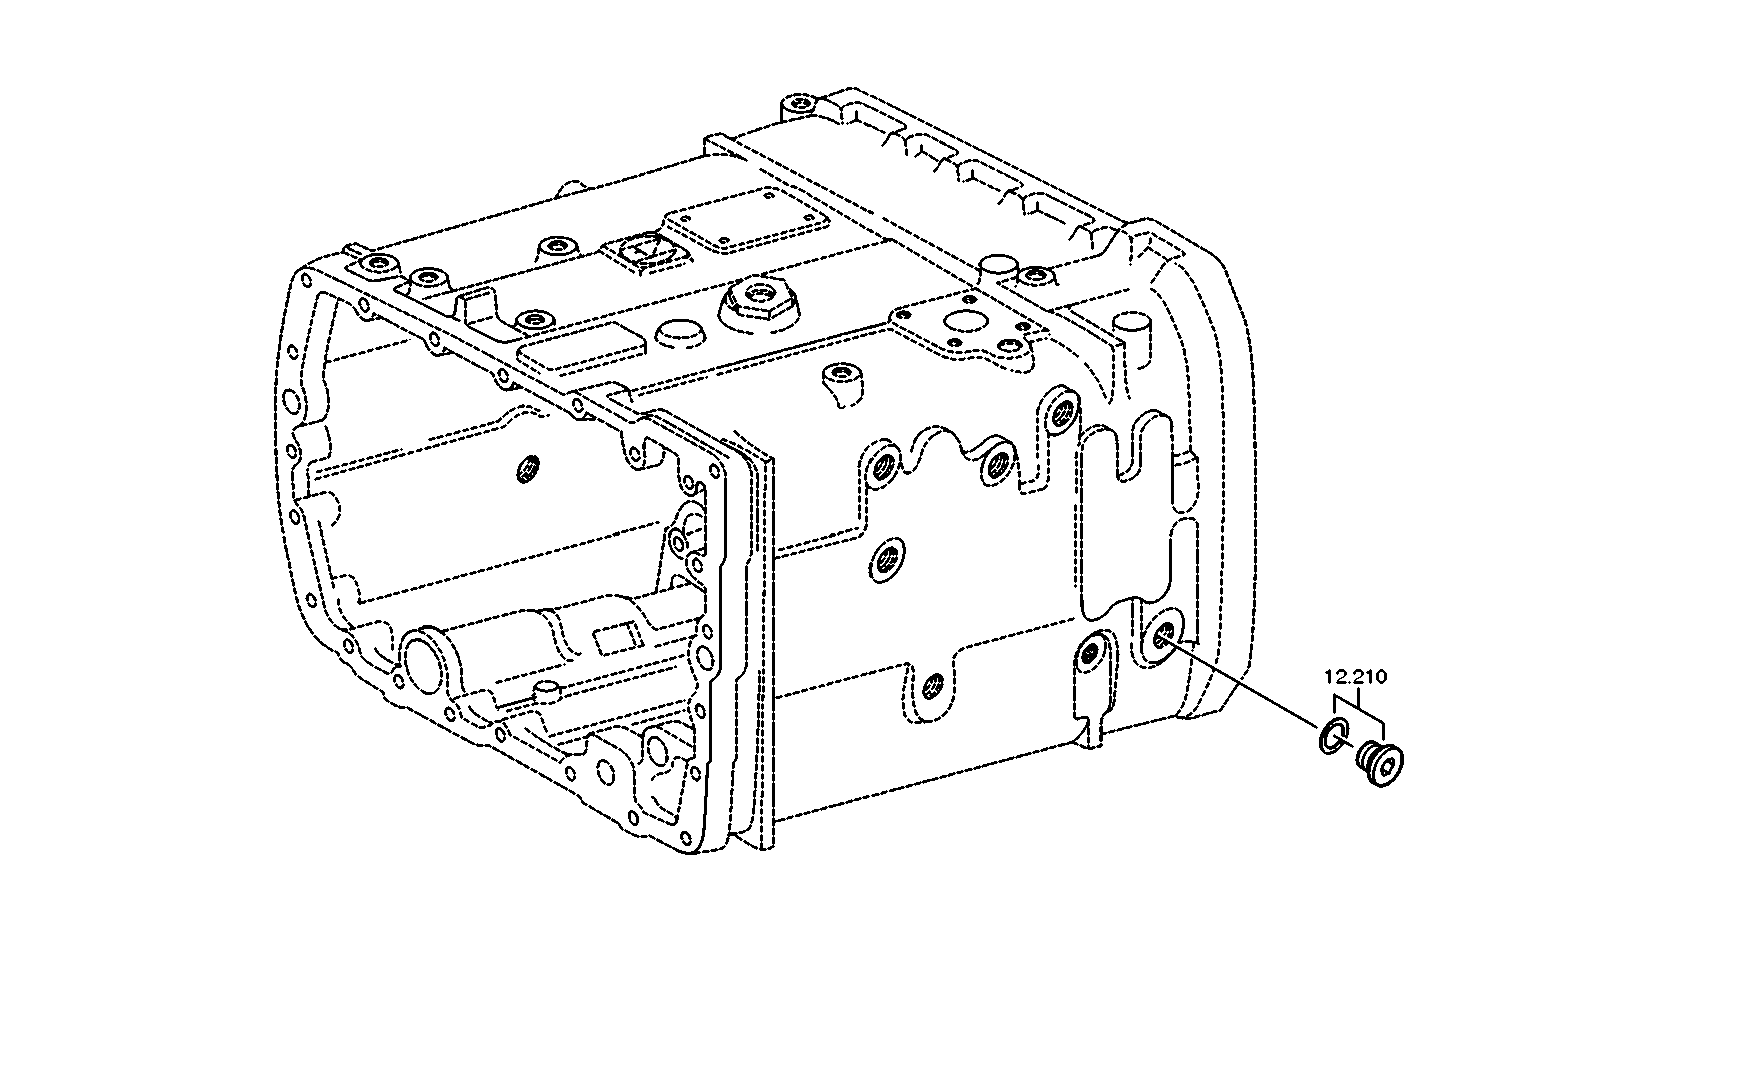 drawing for DAF 69125 - 5/2 WAY VALVE (figure 2)